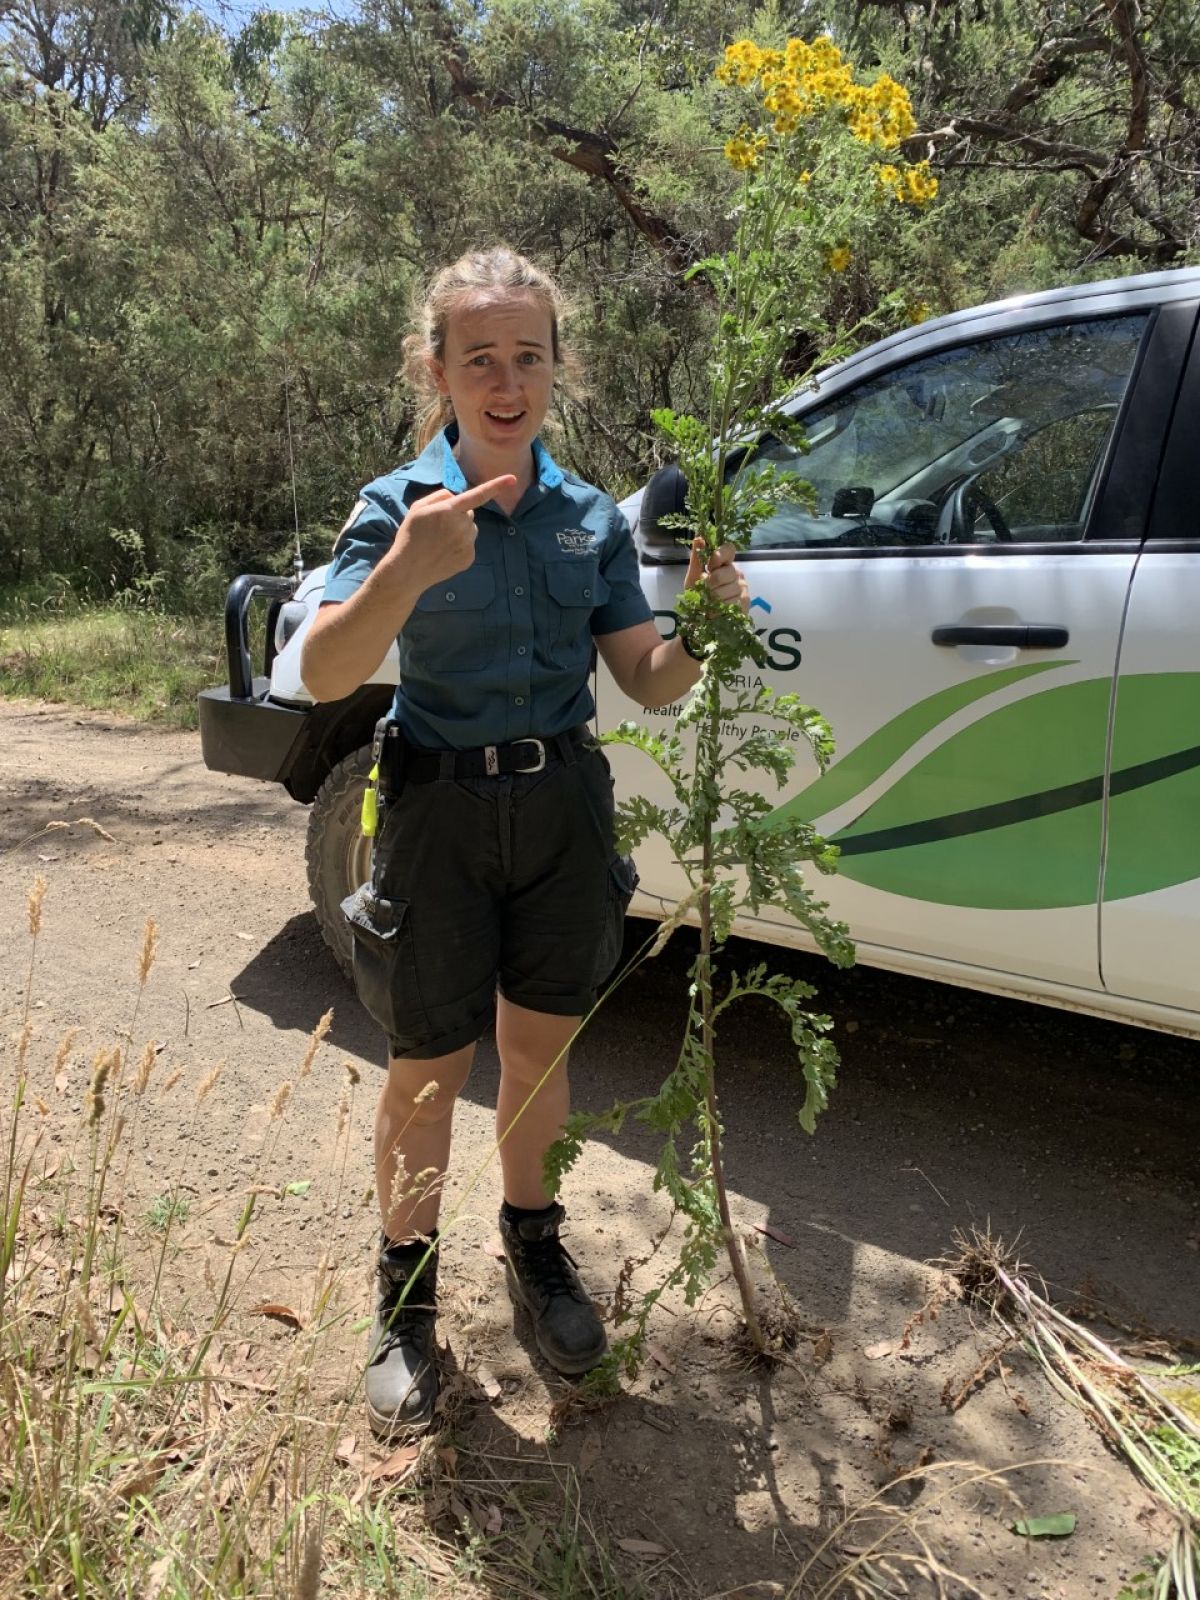 An image of a person holding up a weed wearing a Parks Victoria ranger uniform.